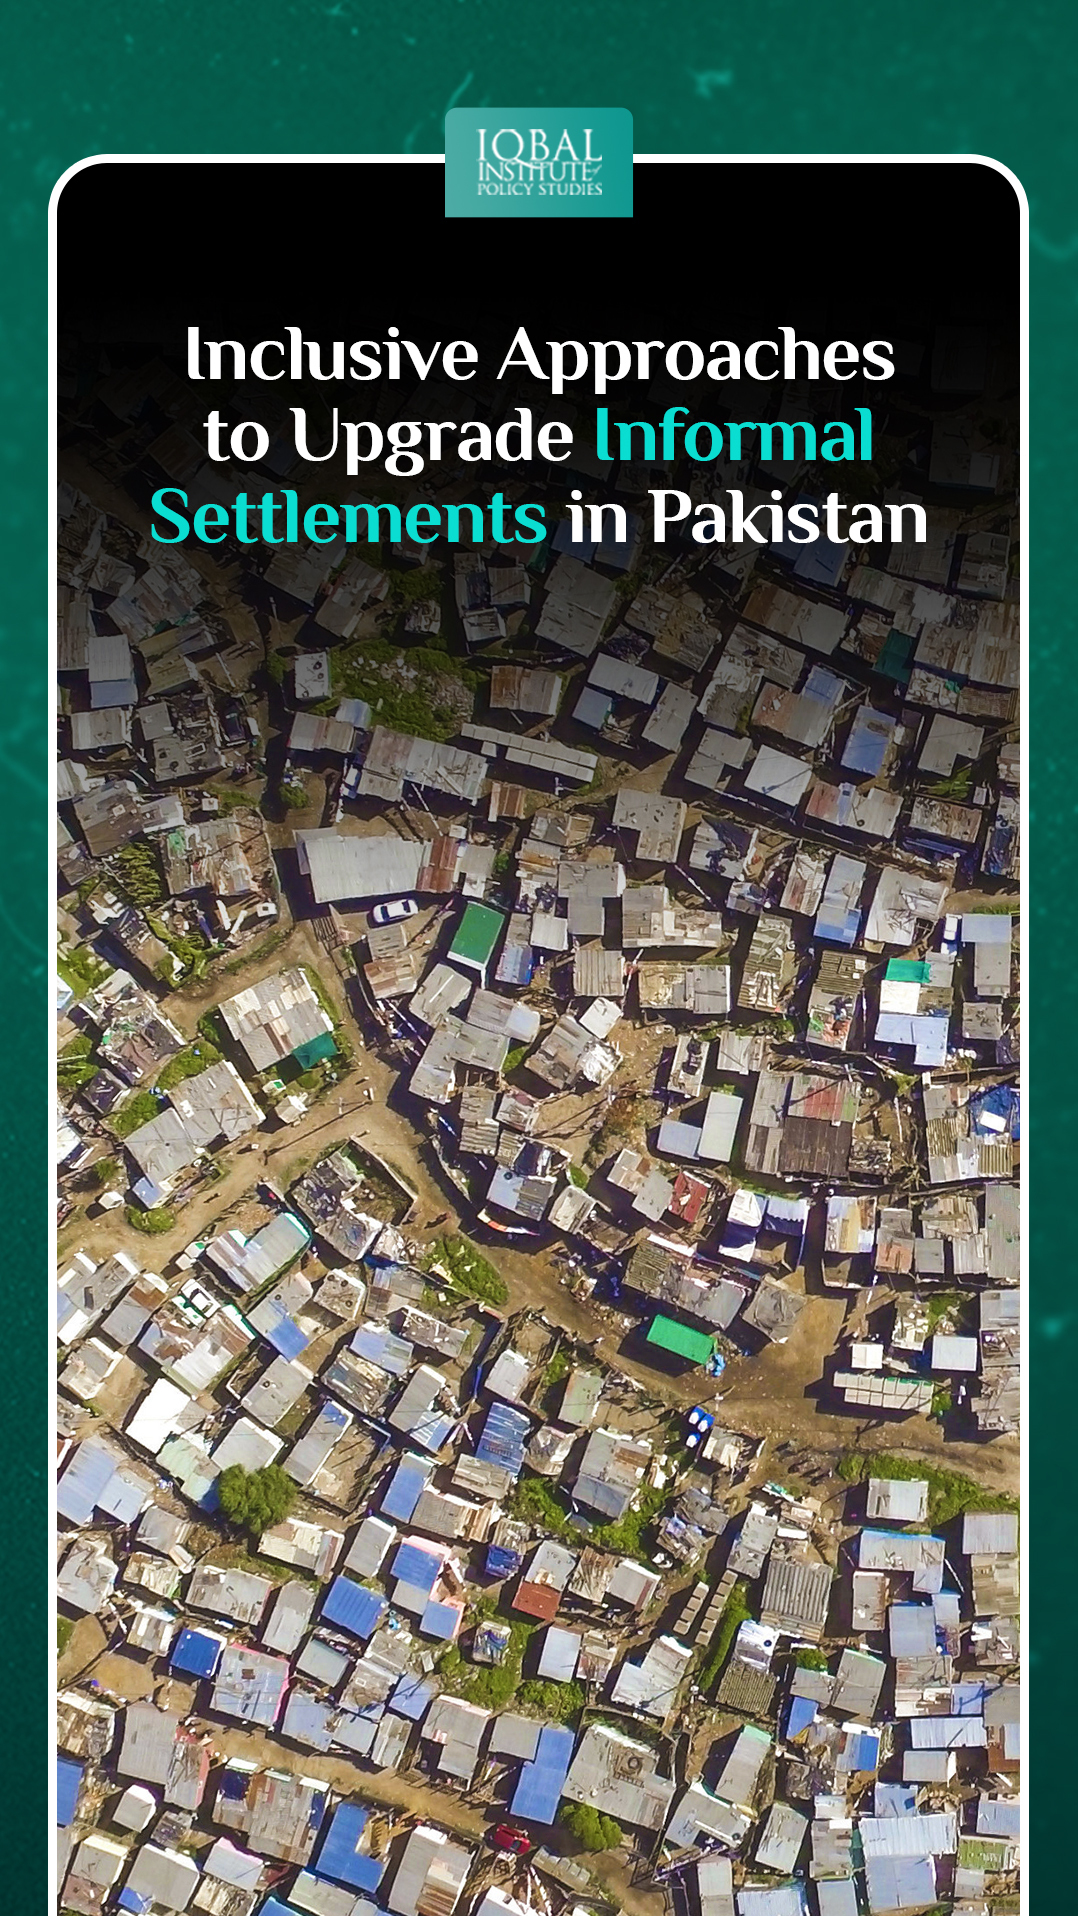 Inclusive Approaches to Upgrade Informal Settlements in Pakistan